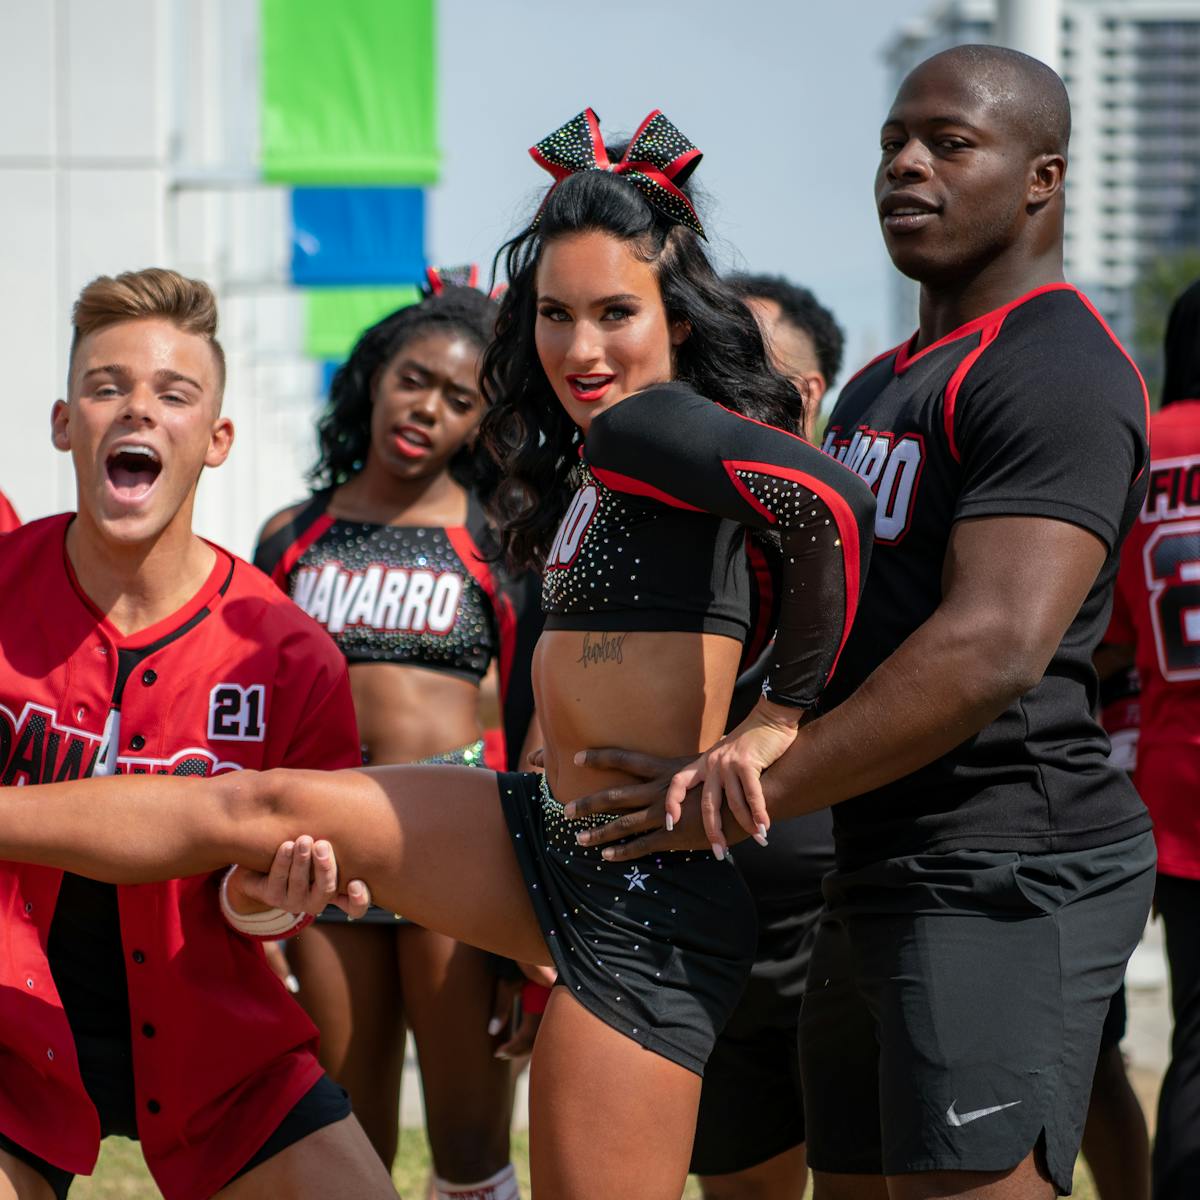 The Cheer cast prepare for a lift. They wear black and red uniforms.